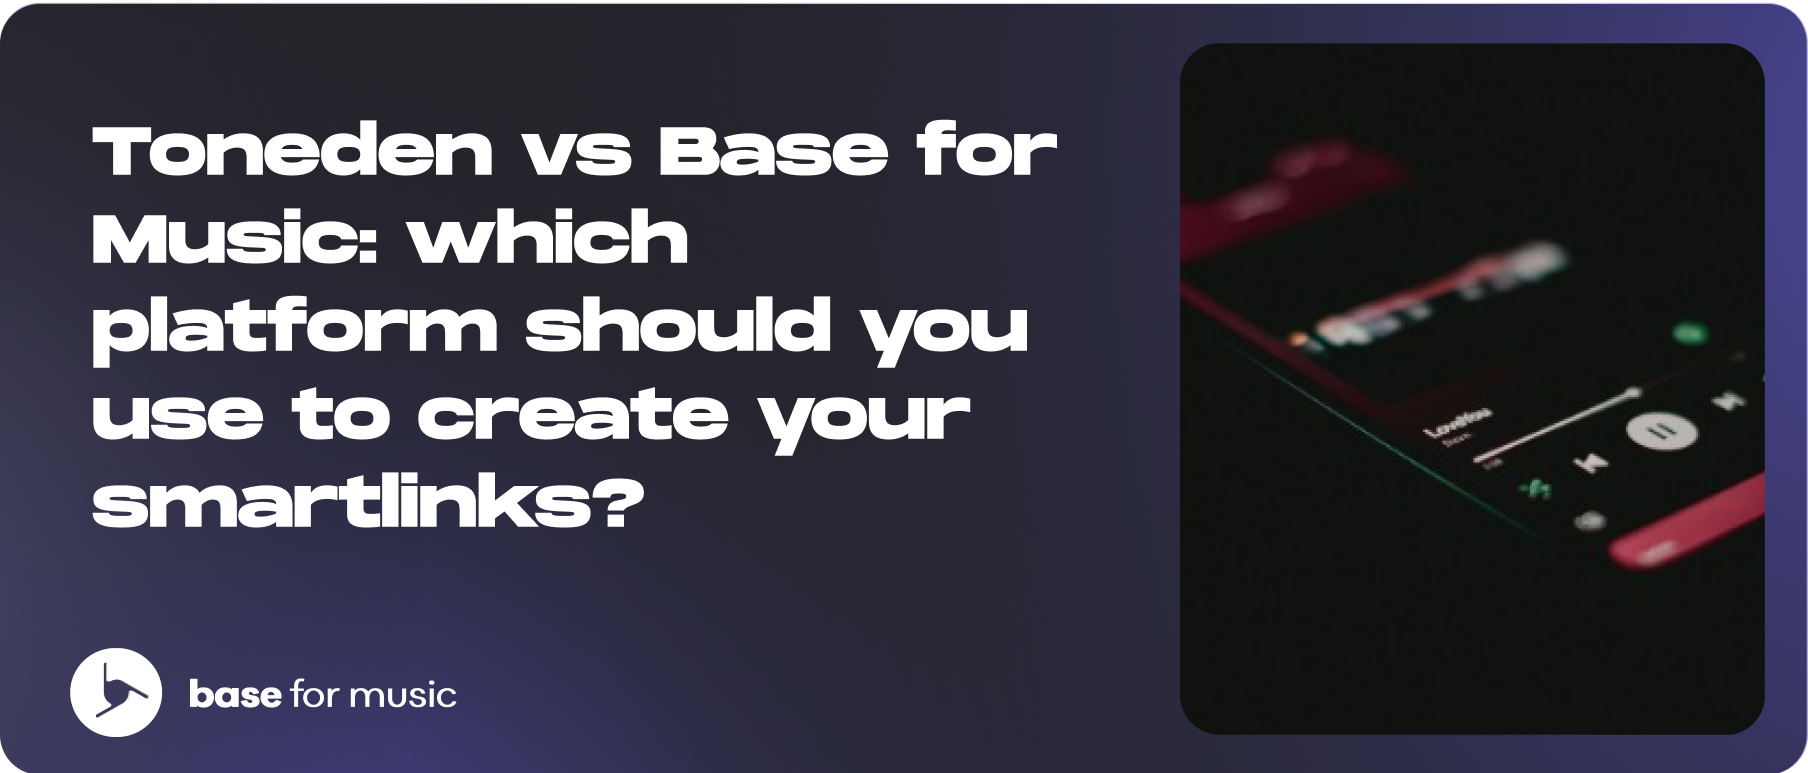 Toneden vs Base for Music: which platform should you use to create your smartlinks?